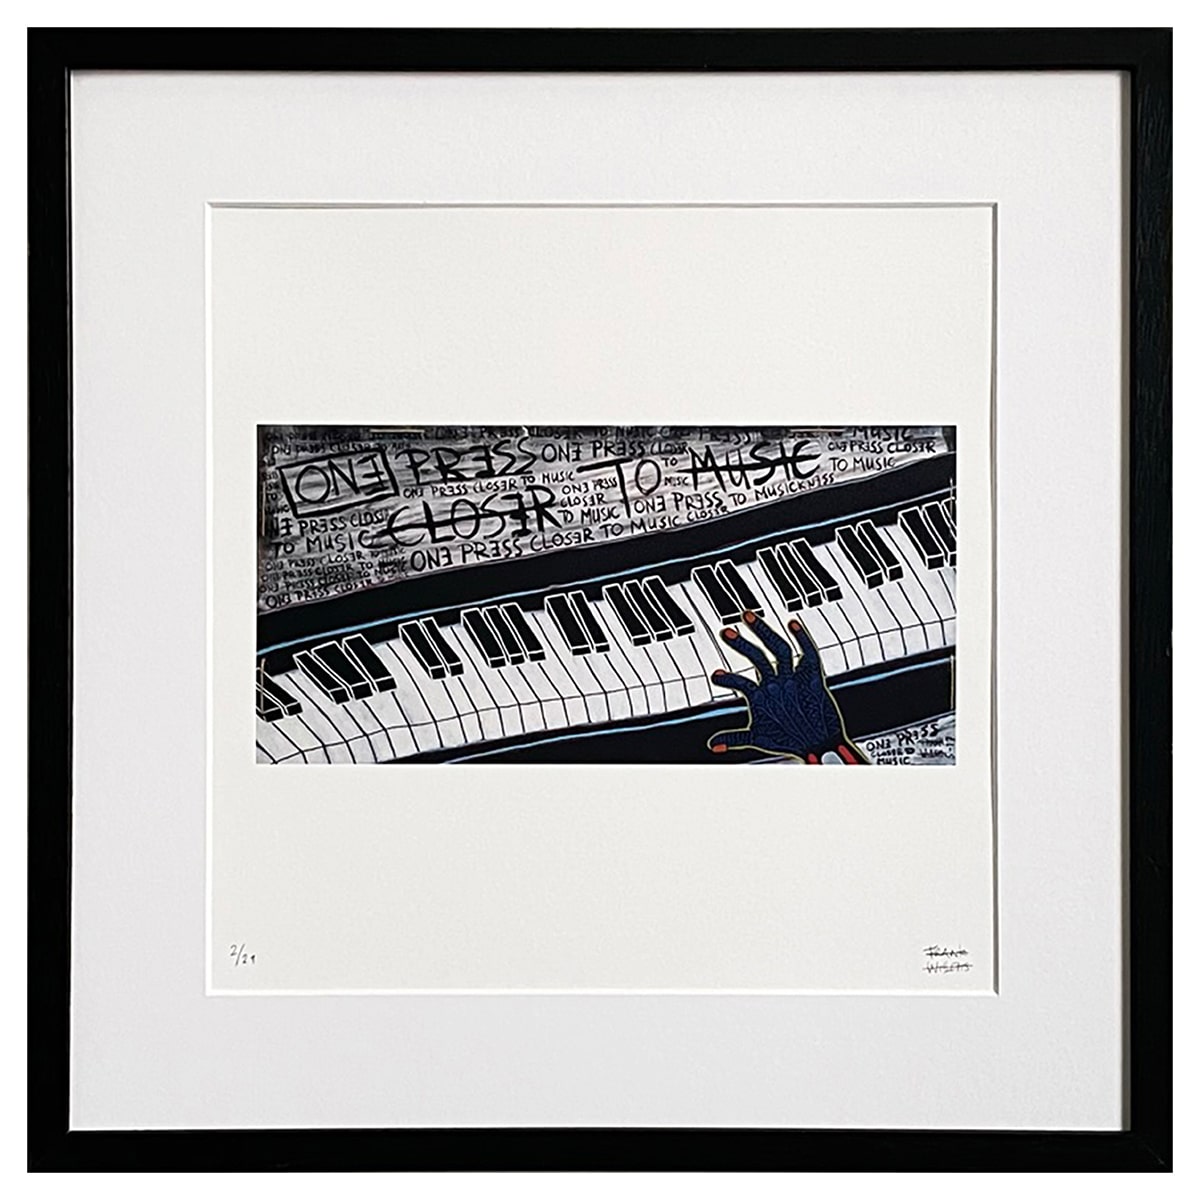 Limited Edt Art Prints - ONE PRESS CLOSER TO MUSIC - Frank Willems